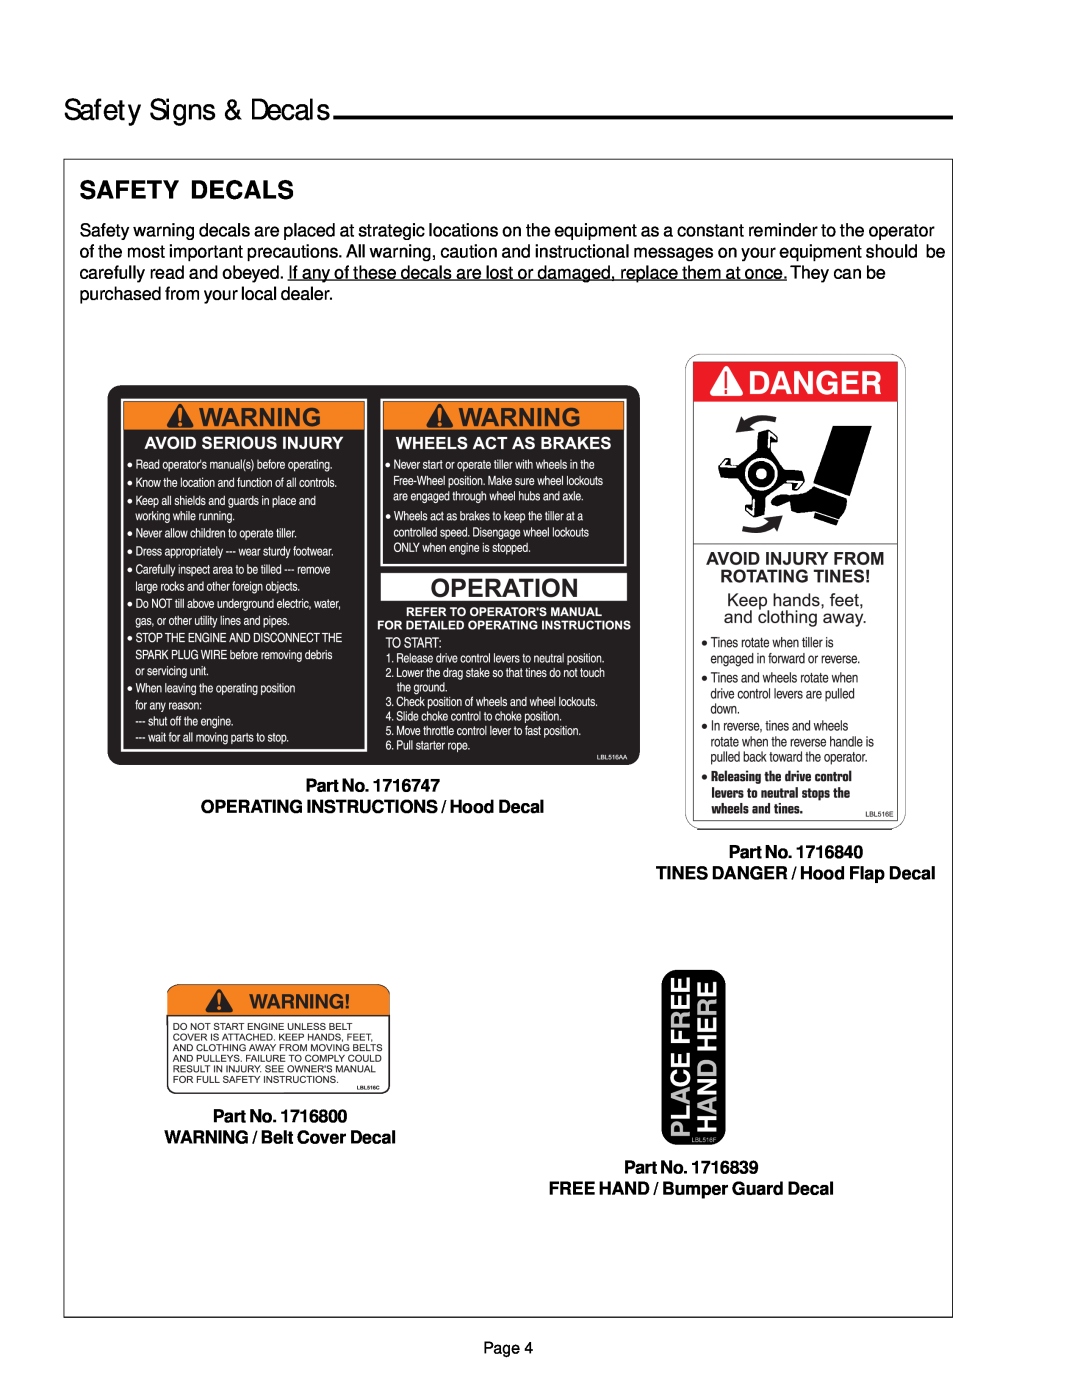 Simplicity 1693207 Safety Signs & Decals, Safety Decals, OPERATING INSTRUCTIONS / Hood Decal, WARNING / Belt Cover Decal 